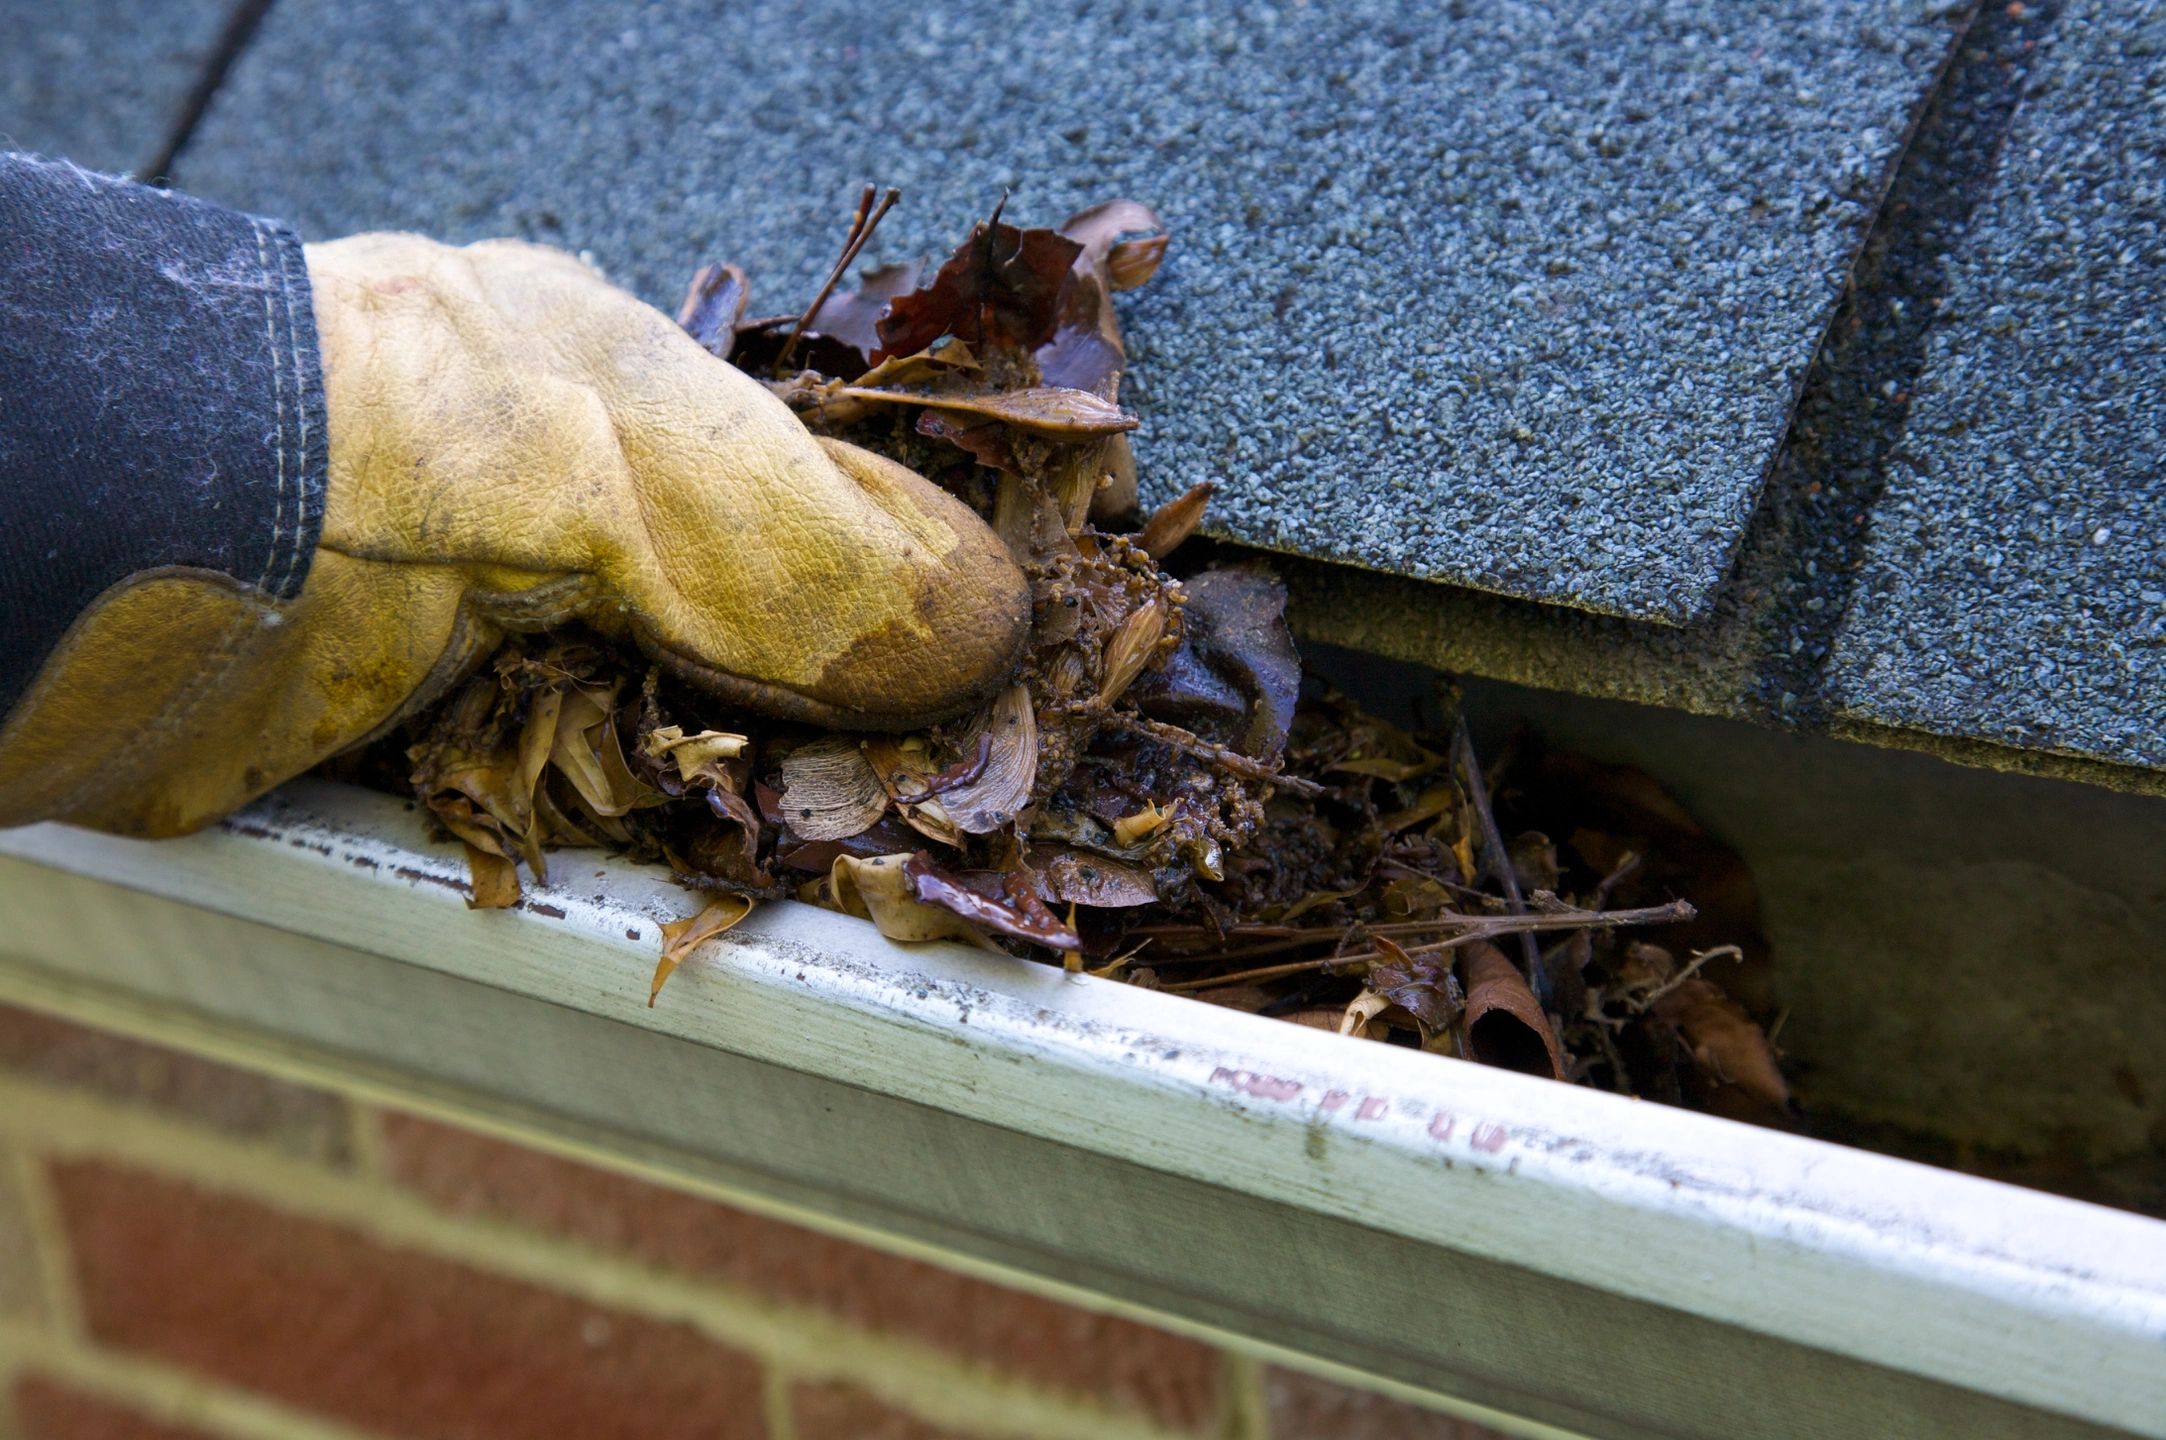 Gutter Cleaning in Boston and Metrowest MA